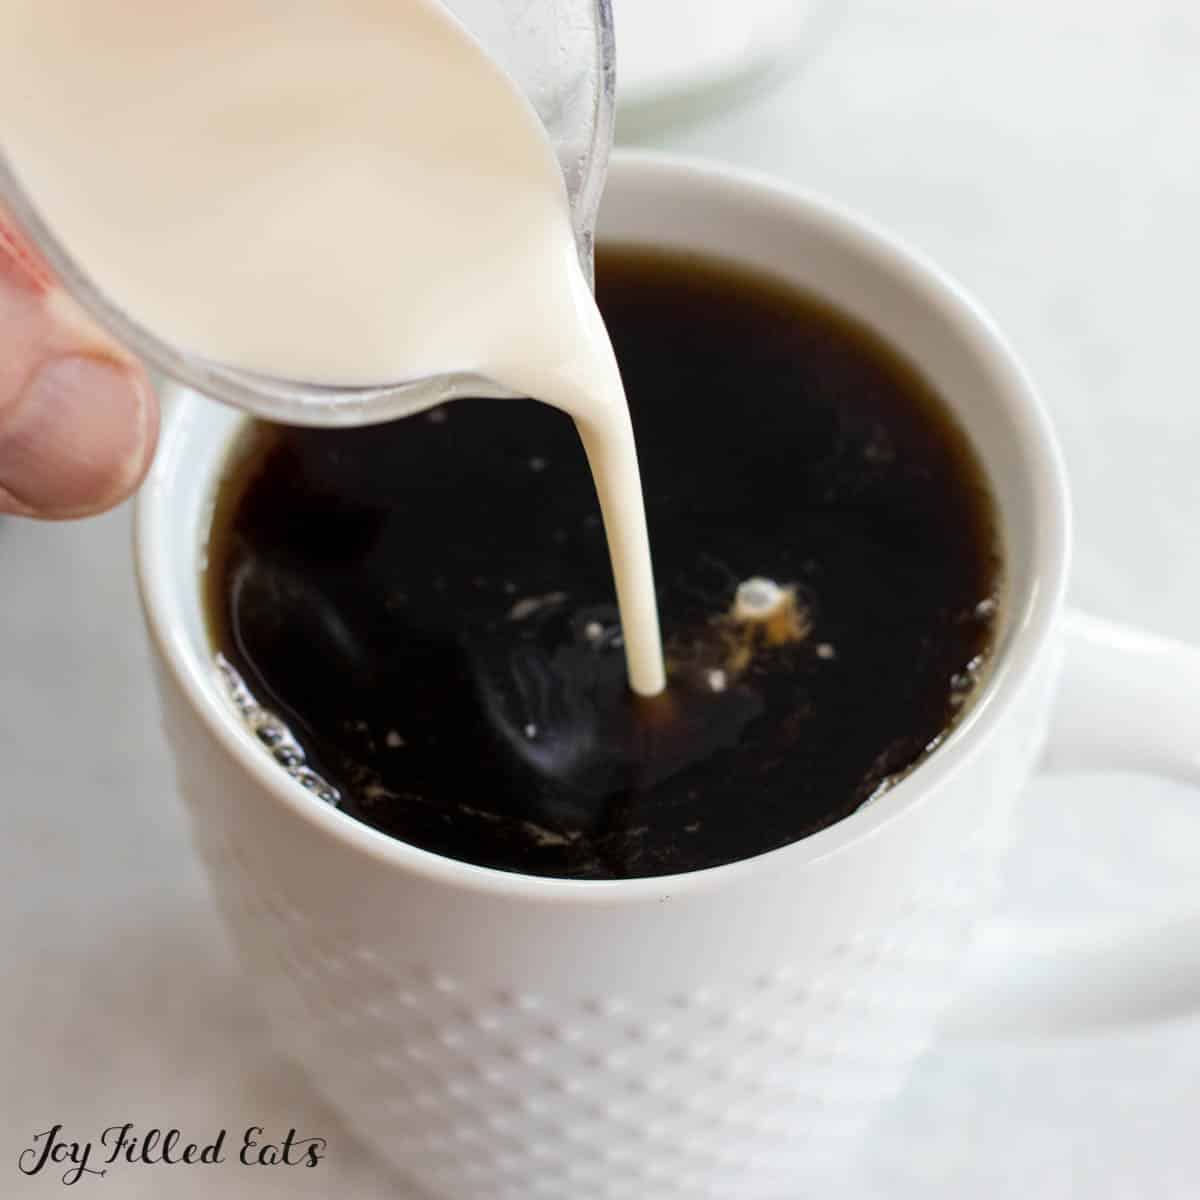 How to Make Butter Coffee Without a Blender